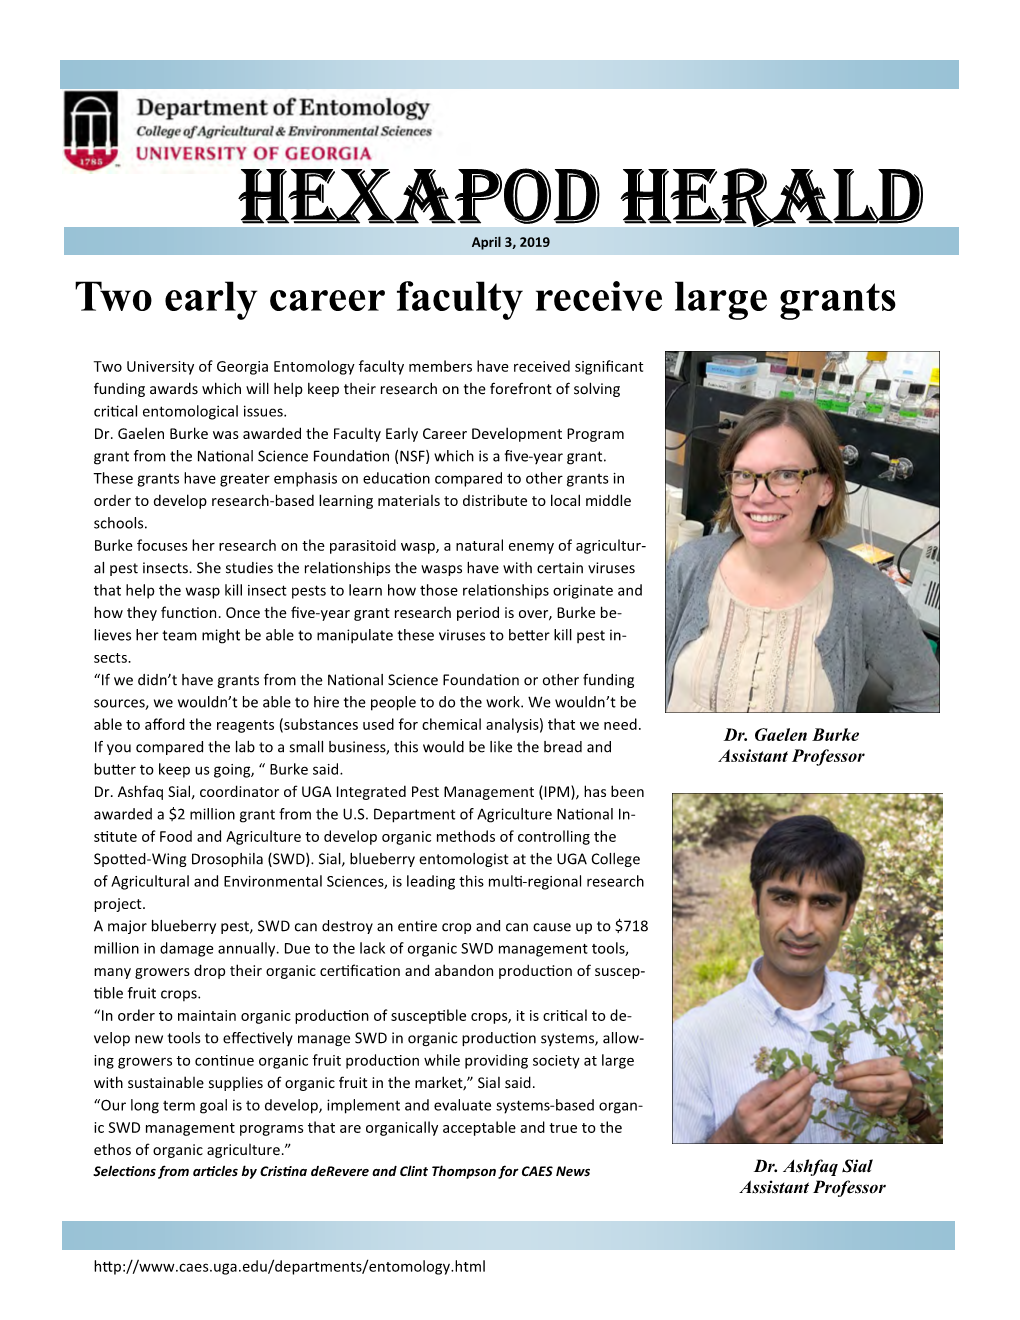 Hexapod Herald April 3, 2019 Two Early Career Faculty Receive Large Grants